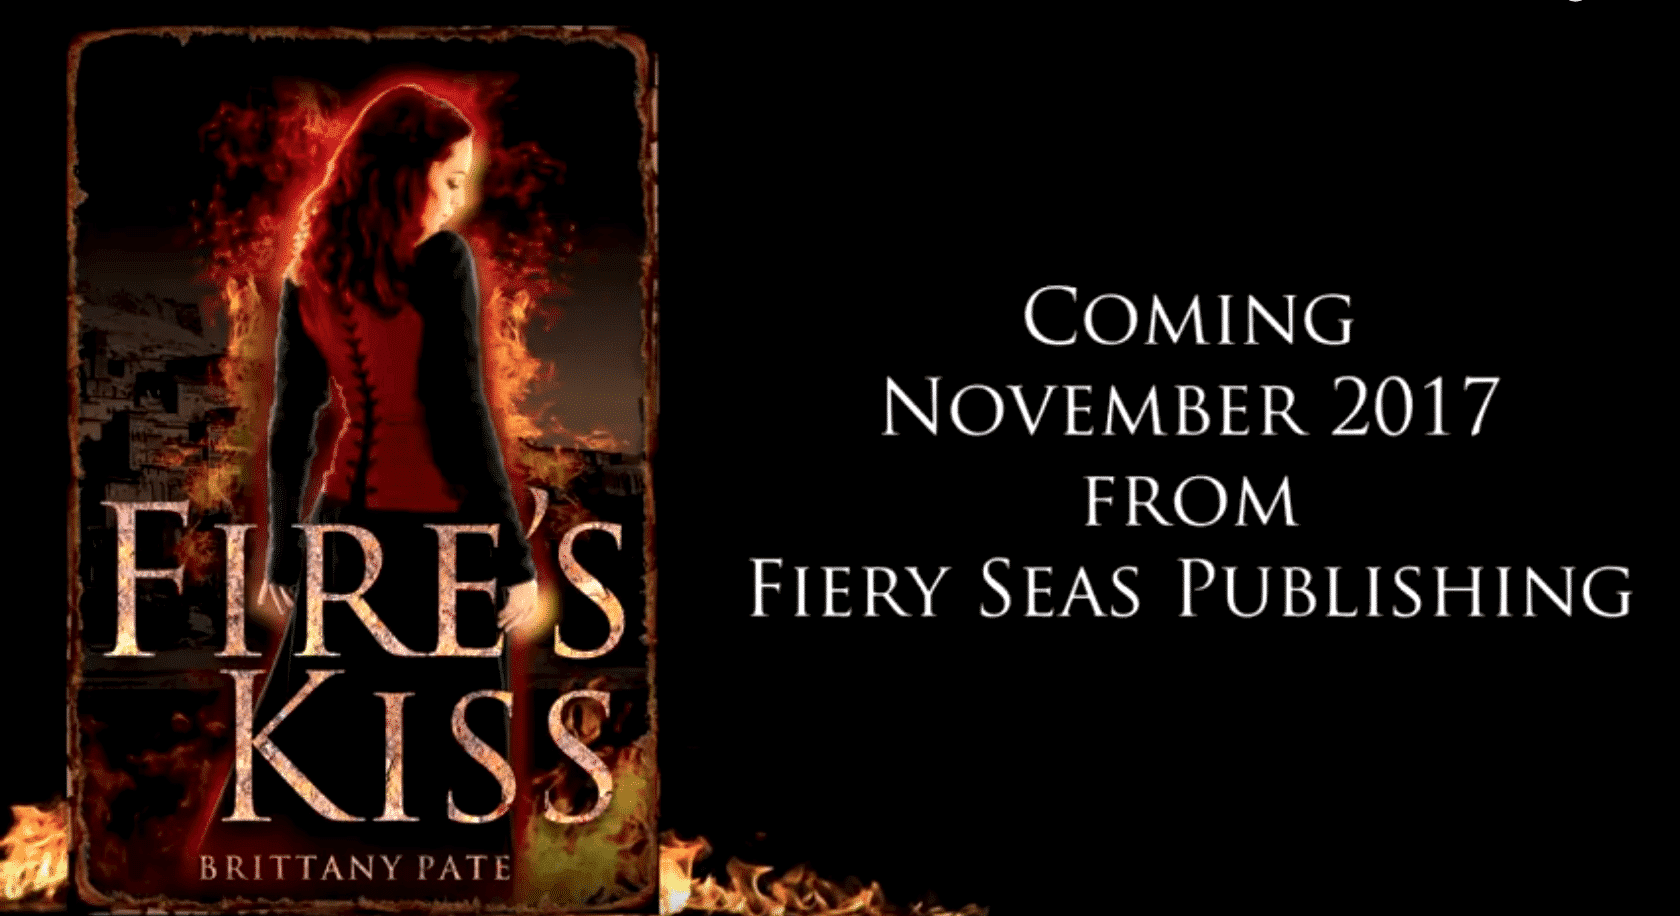 Review of Fire’s Kiss by Brittany Pate